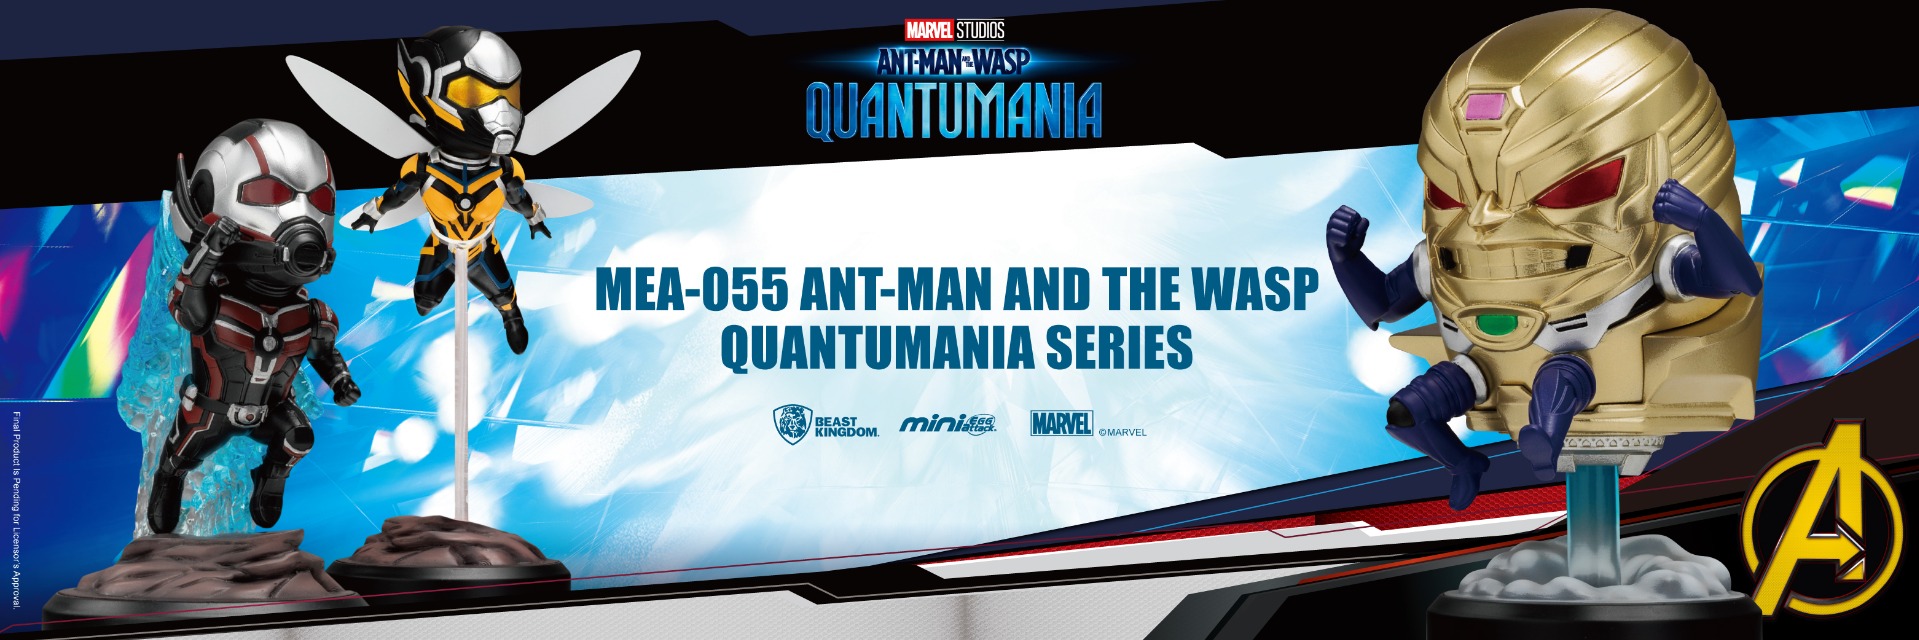 MEA-055 Ant-Man and the Wasp: Quantumania Series